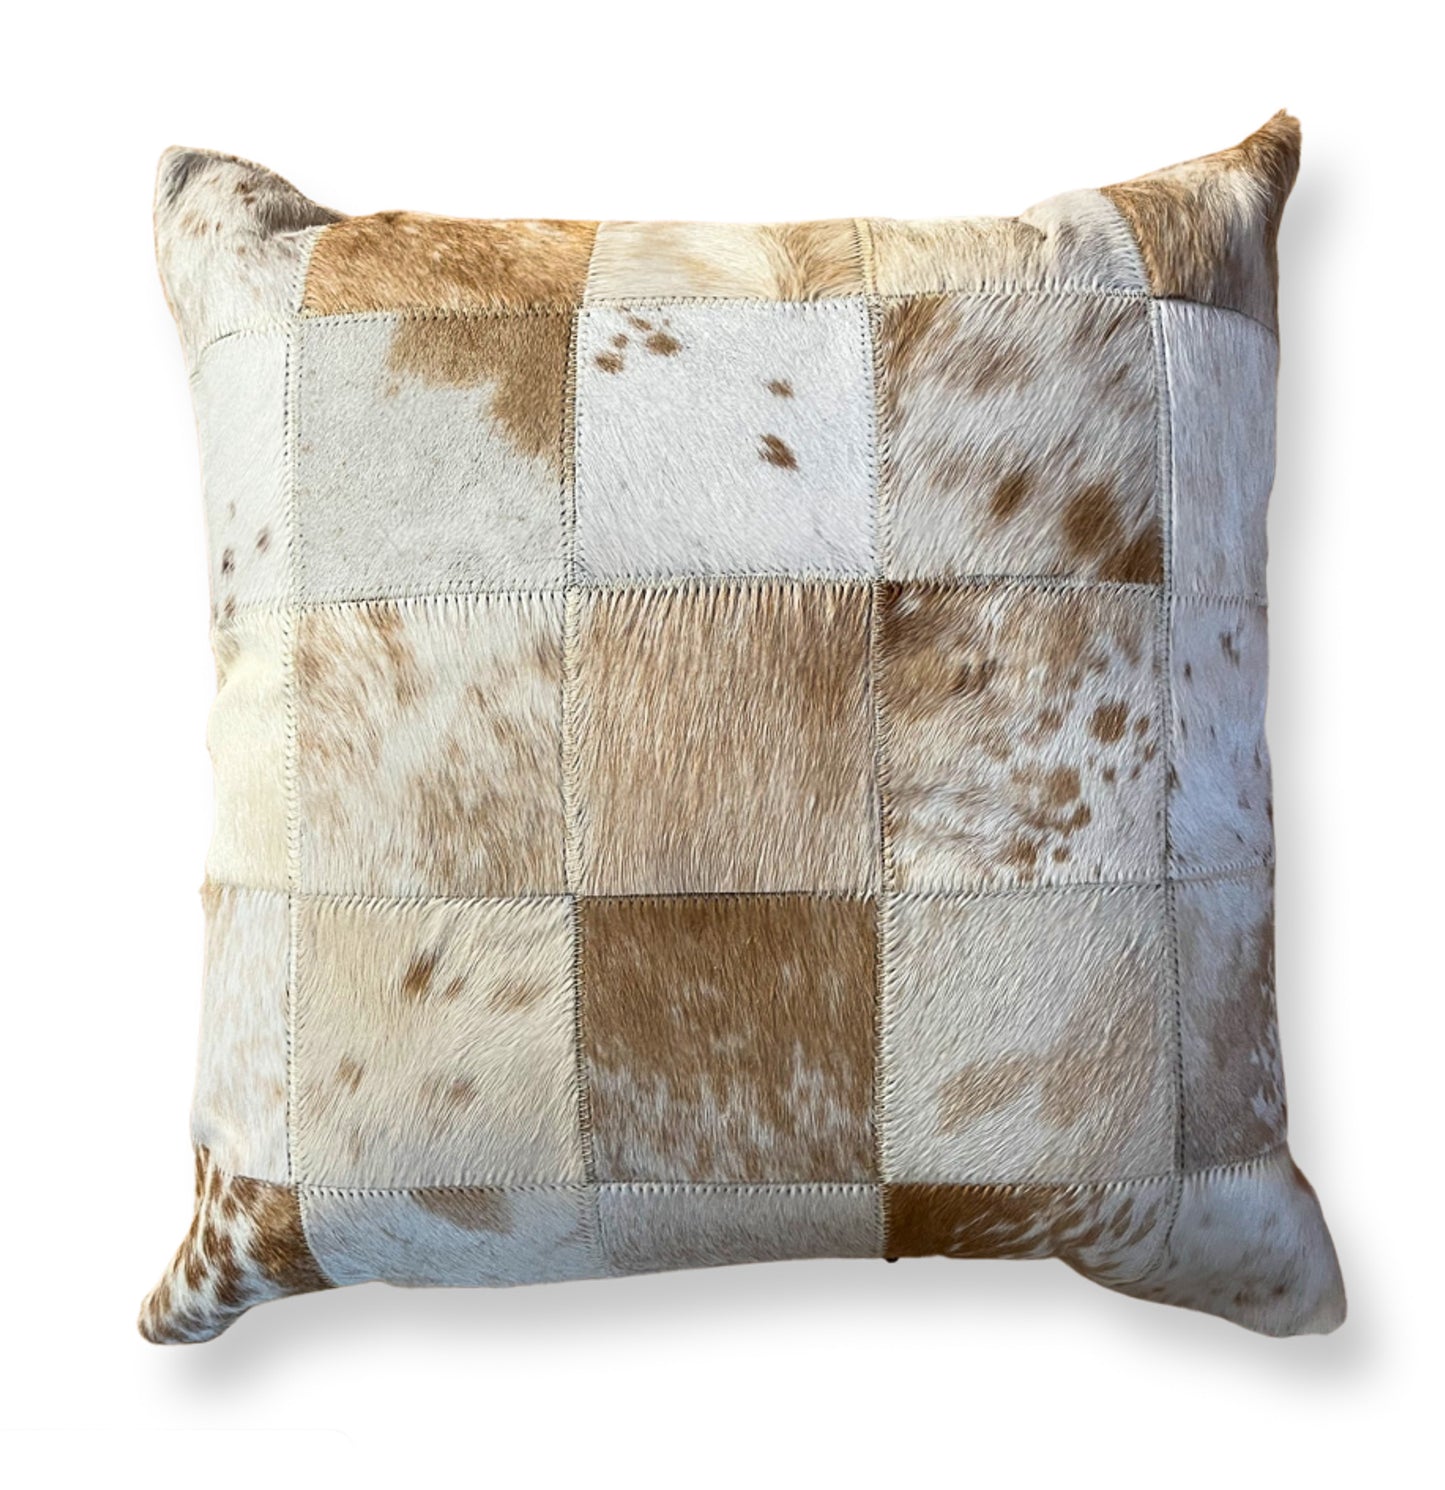 Tan and White Salt and Pepper Patchwork Pillow